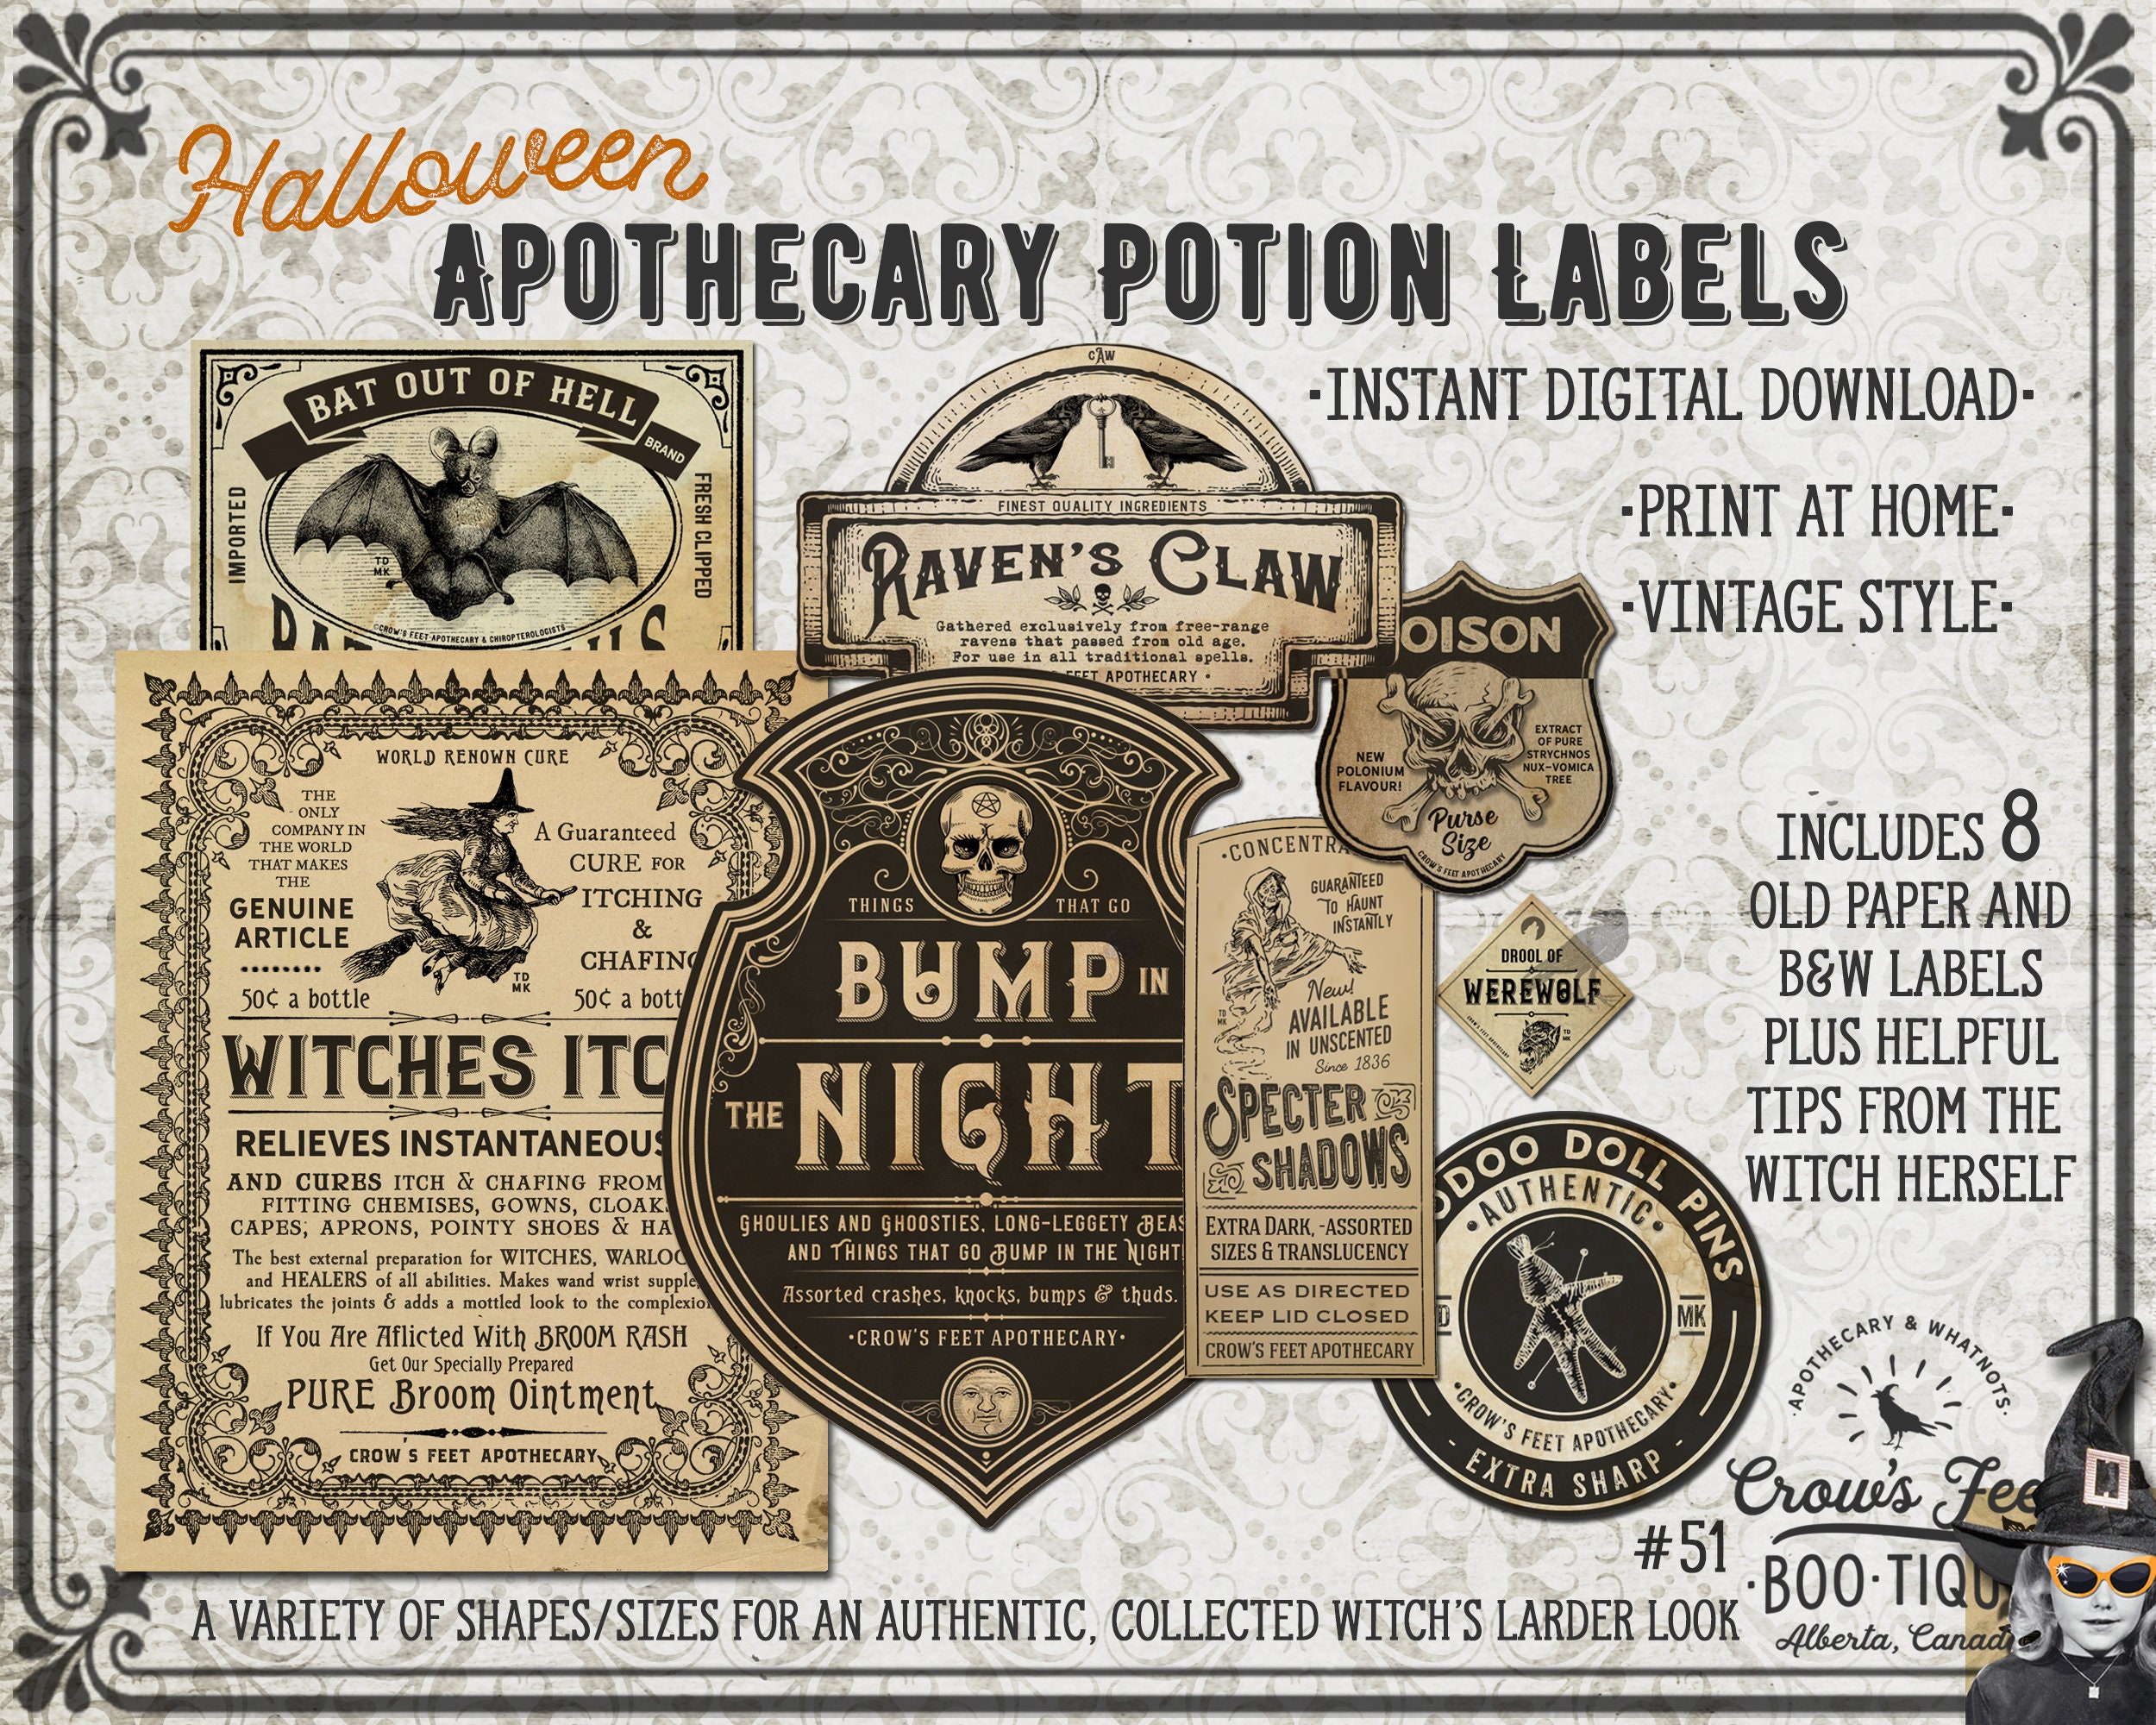 30pcs, Halloween Bottle Labels Animal Apothecary Stickers, Potions Labels  Halloween Medicine Bottle Label Stickers, Vintage Laminated Stickers, Decora